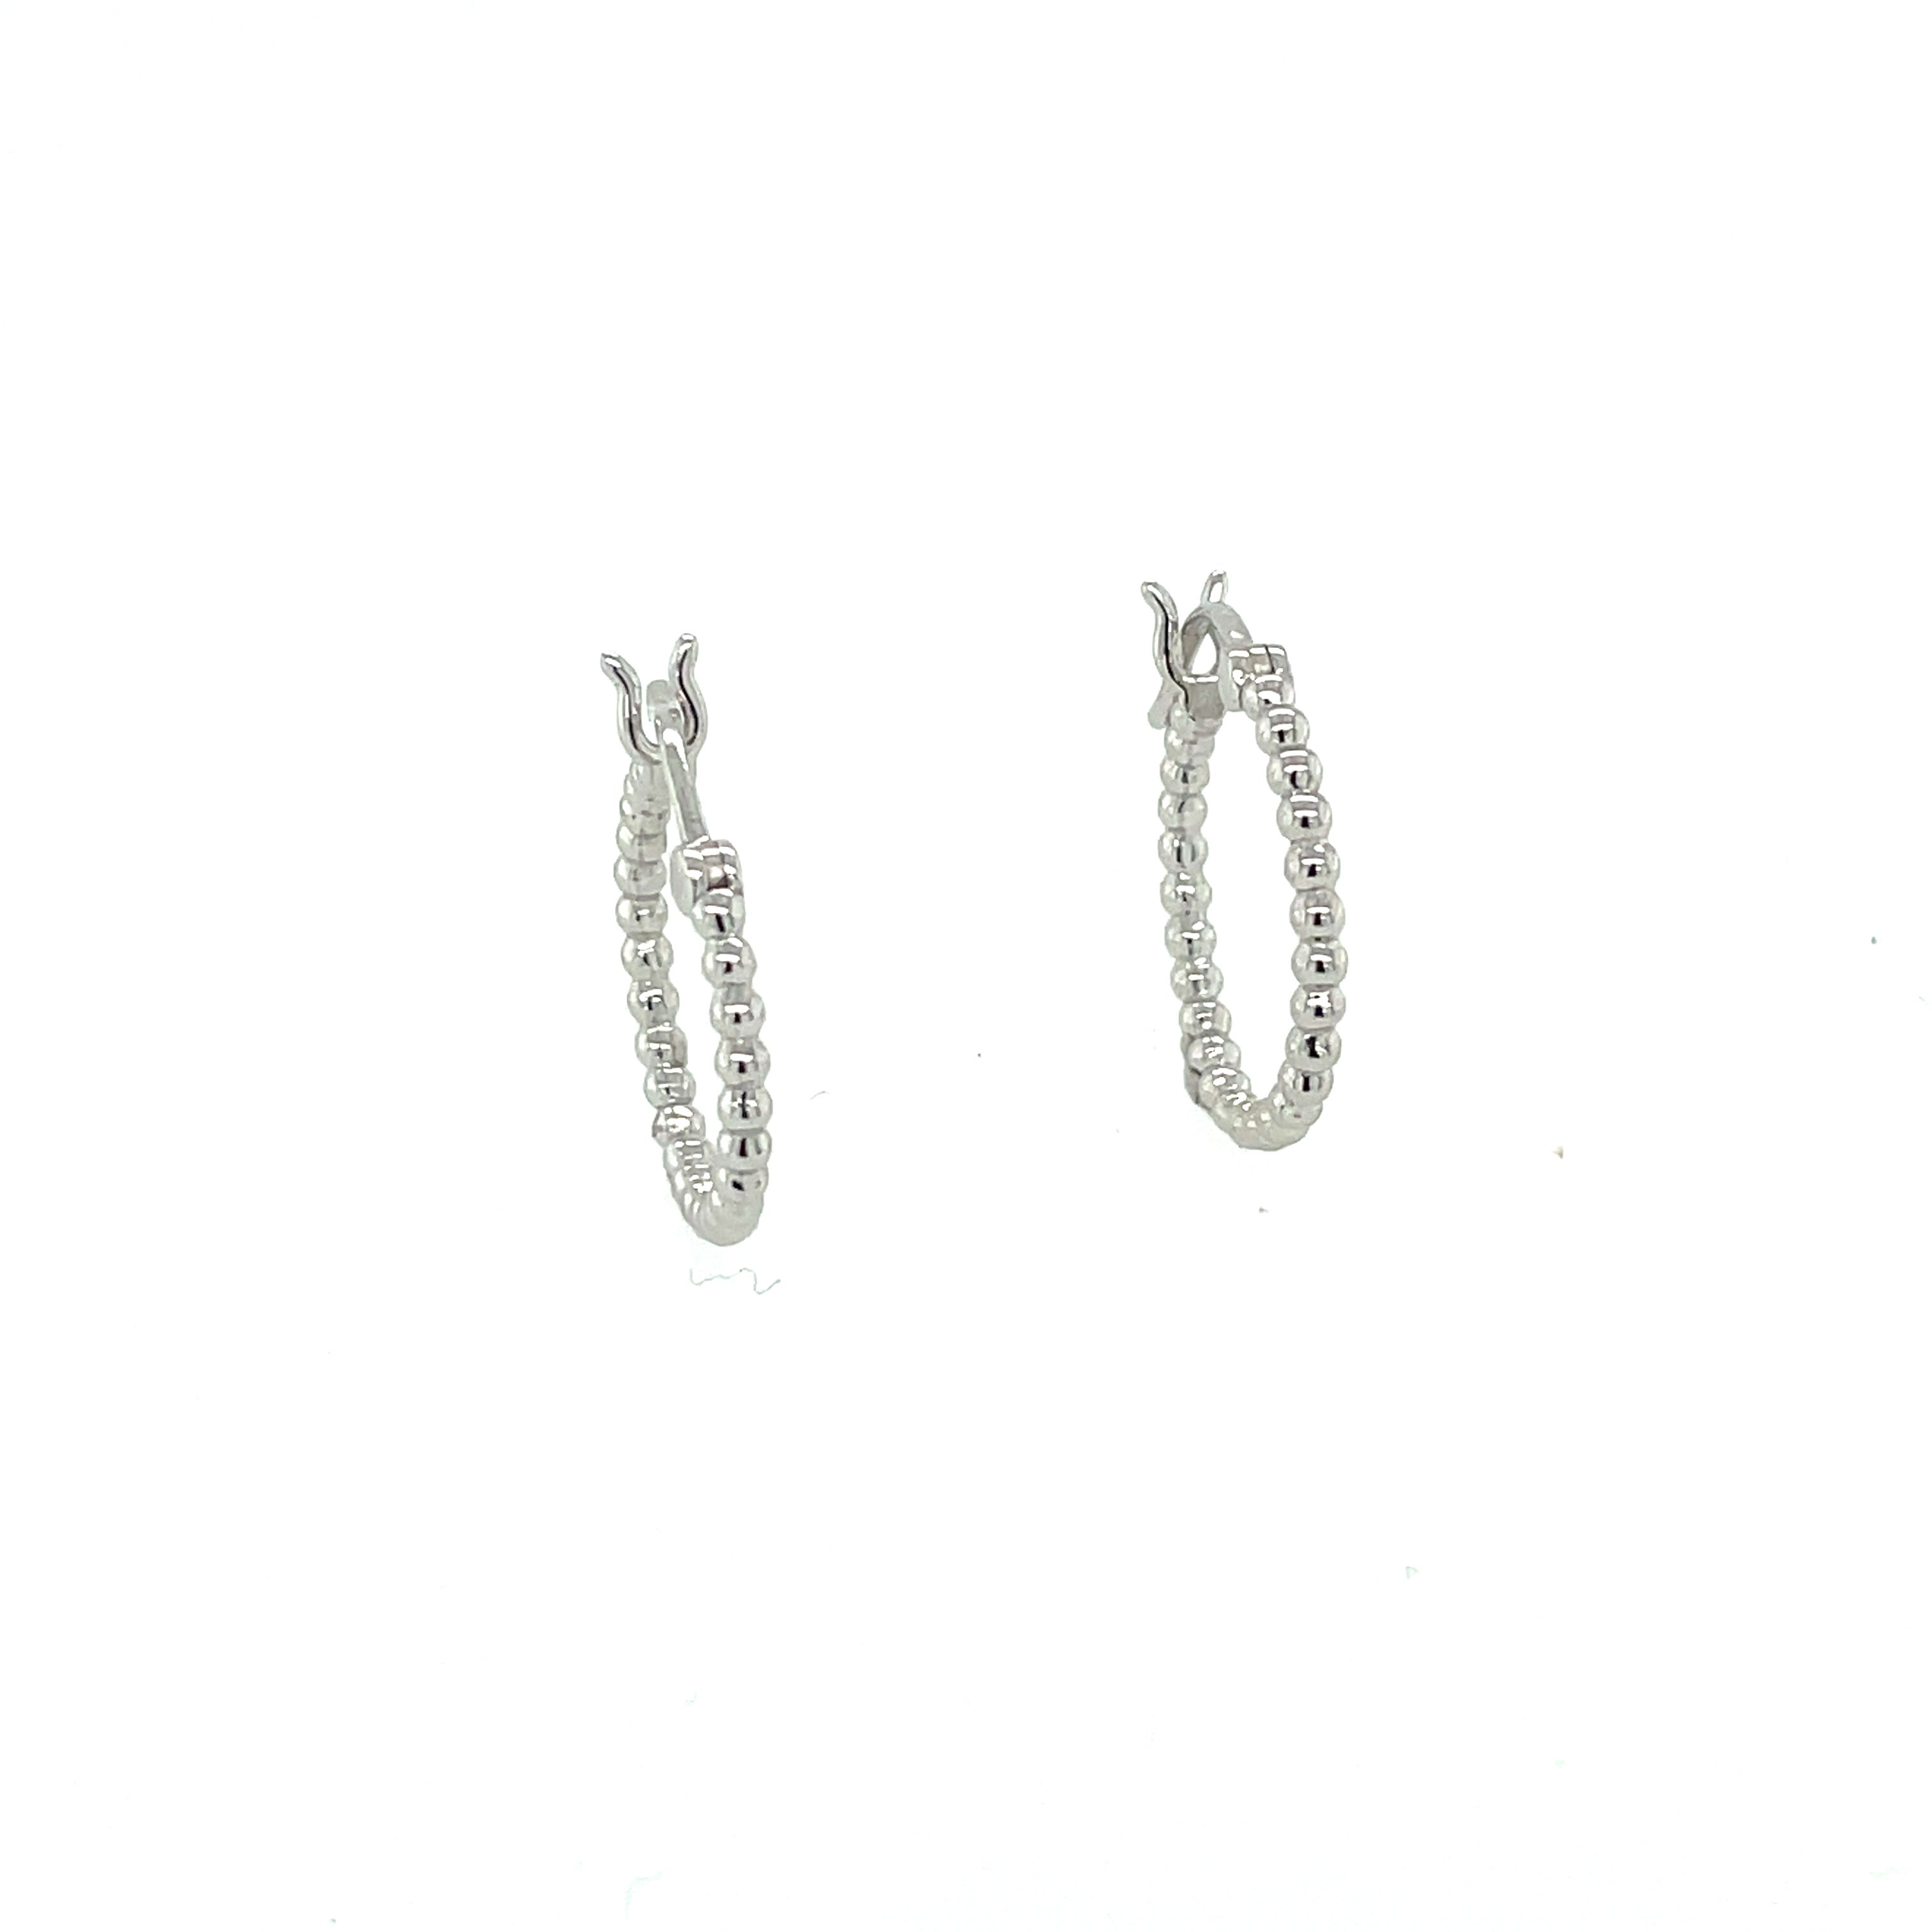 Silver Hoop Earrings - MJ025 - Hallmark Jewellers Formby & The Jewellers Bench Widnes